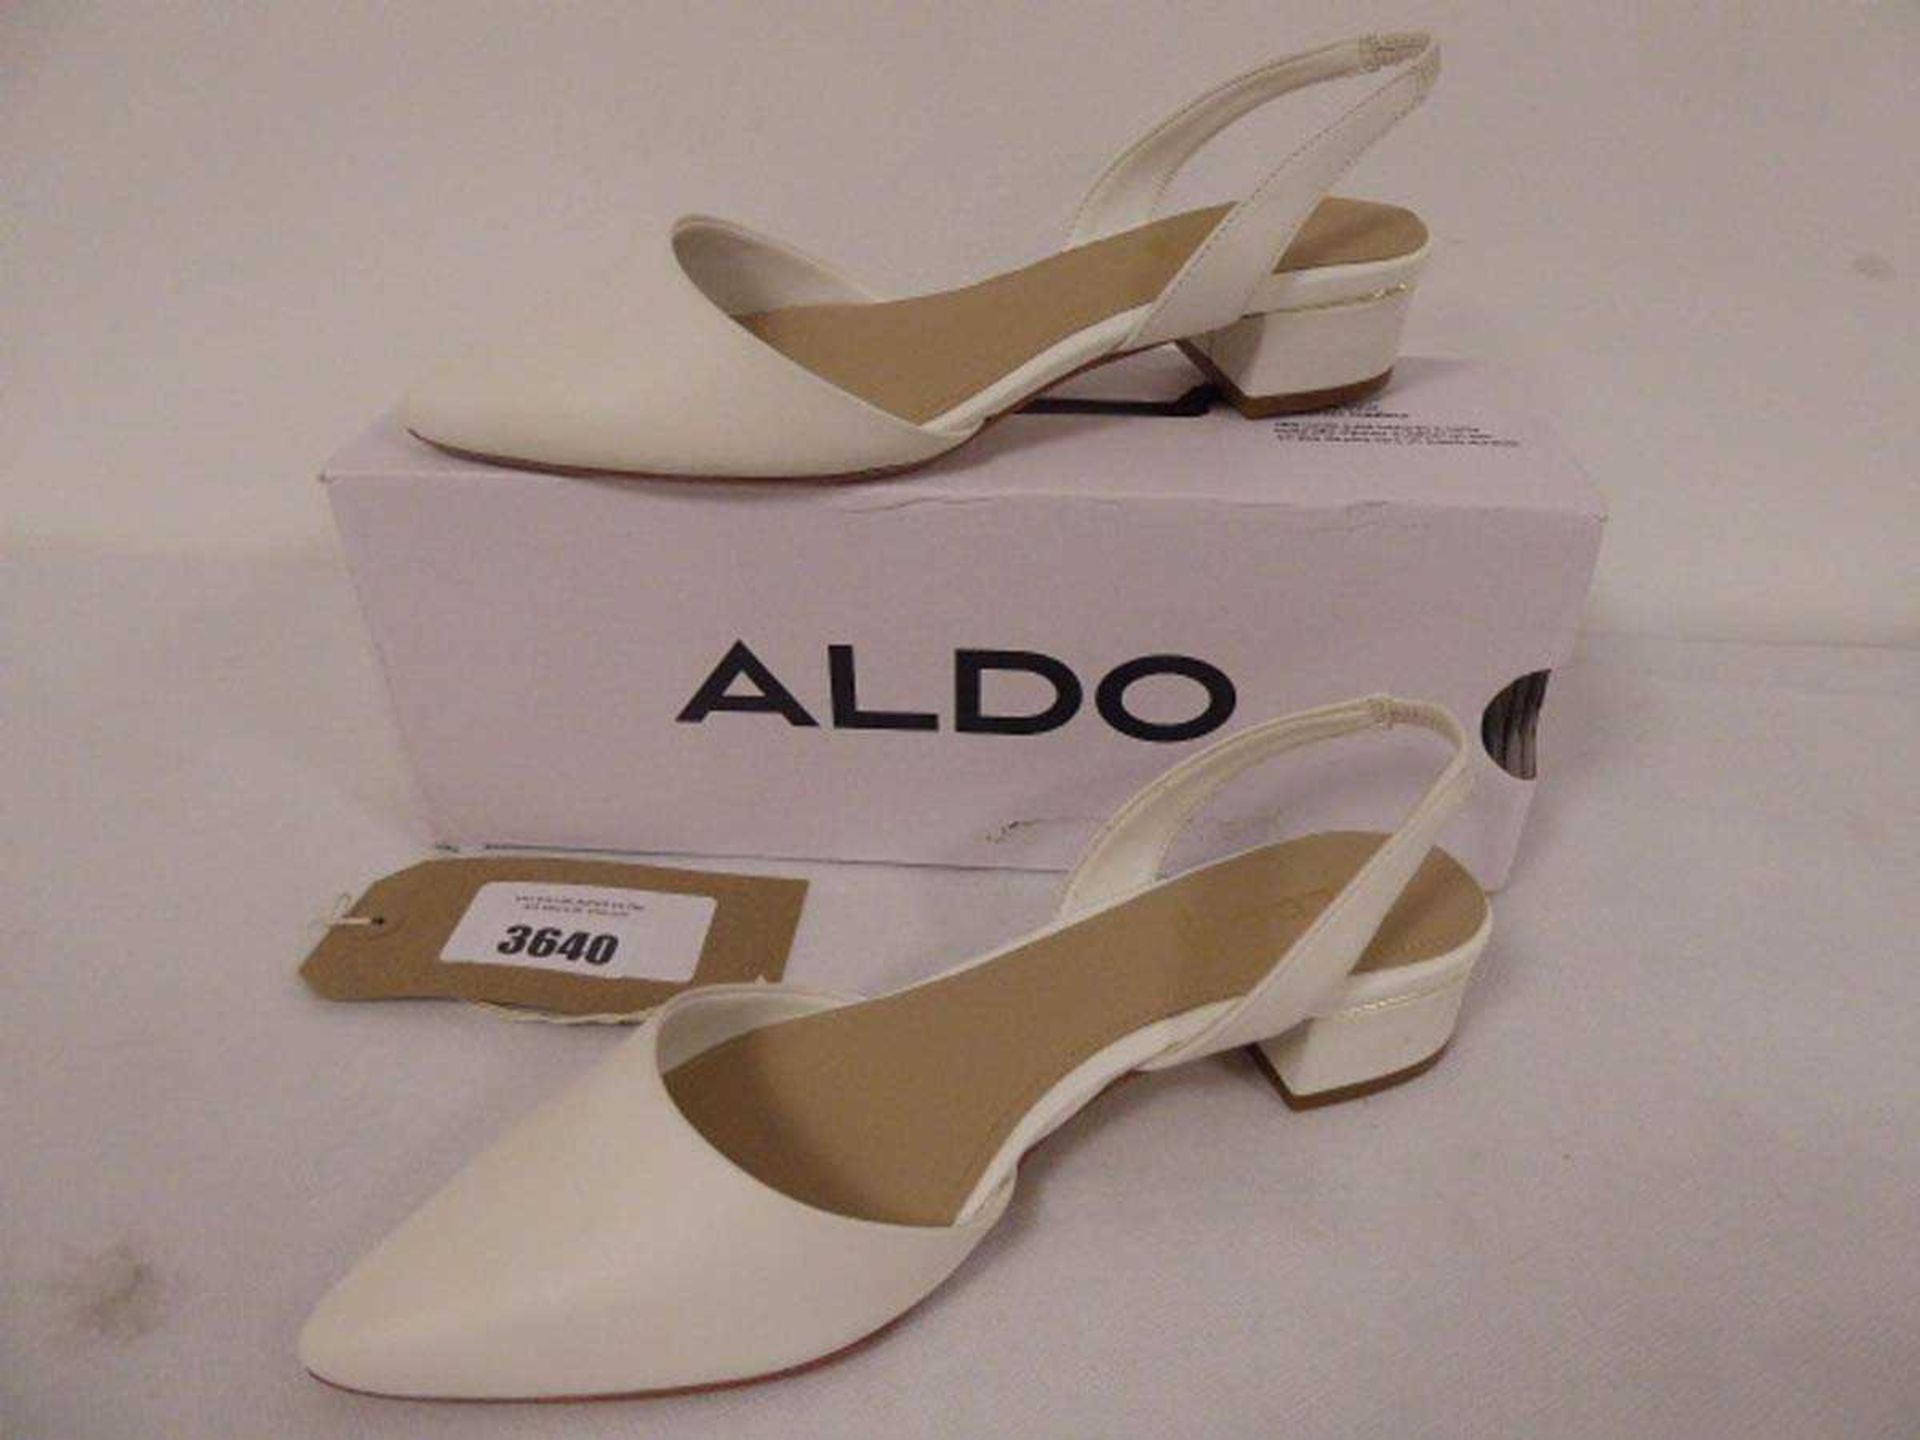 +VAT 1 x pair of leather Aldo Anathana shoes in white, size UK 4 (boxed)